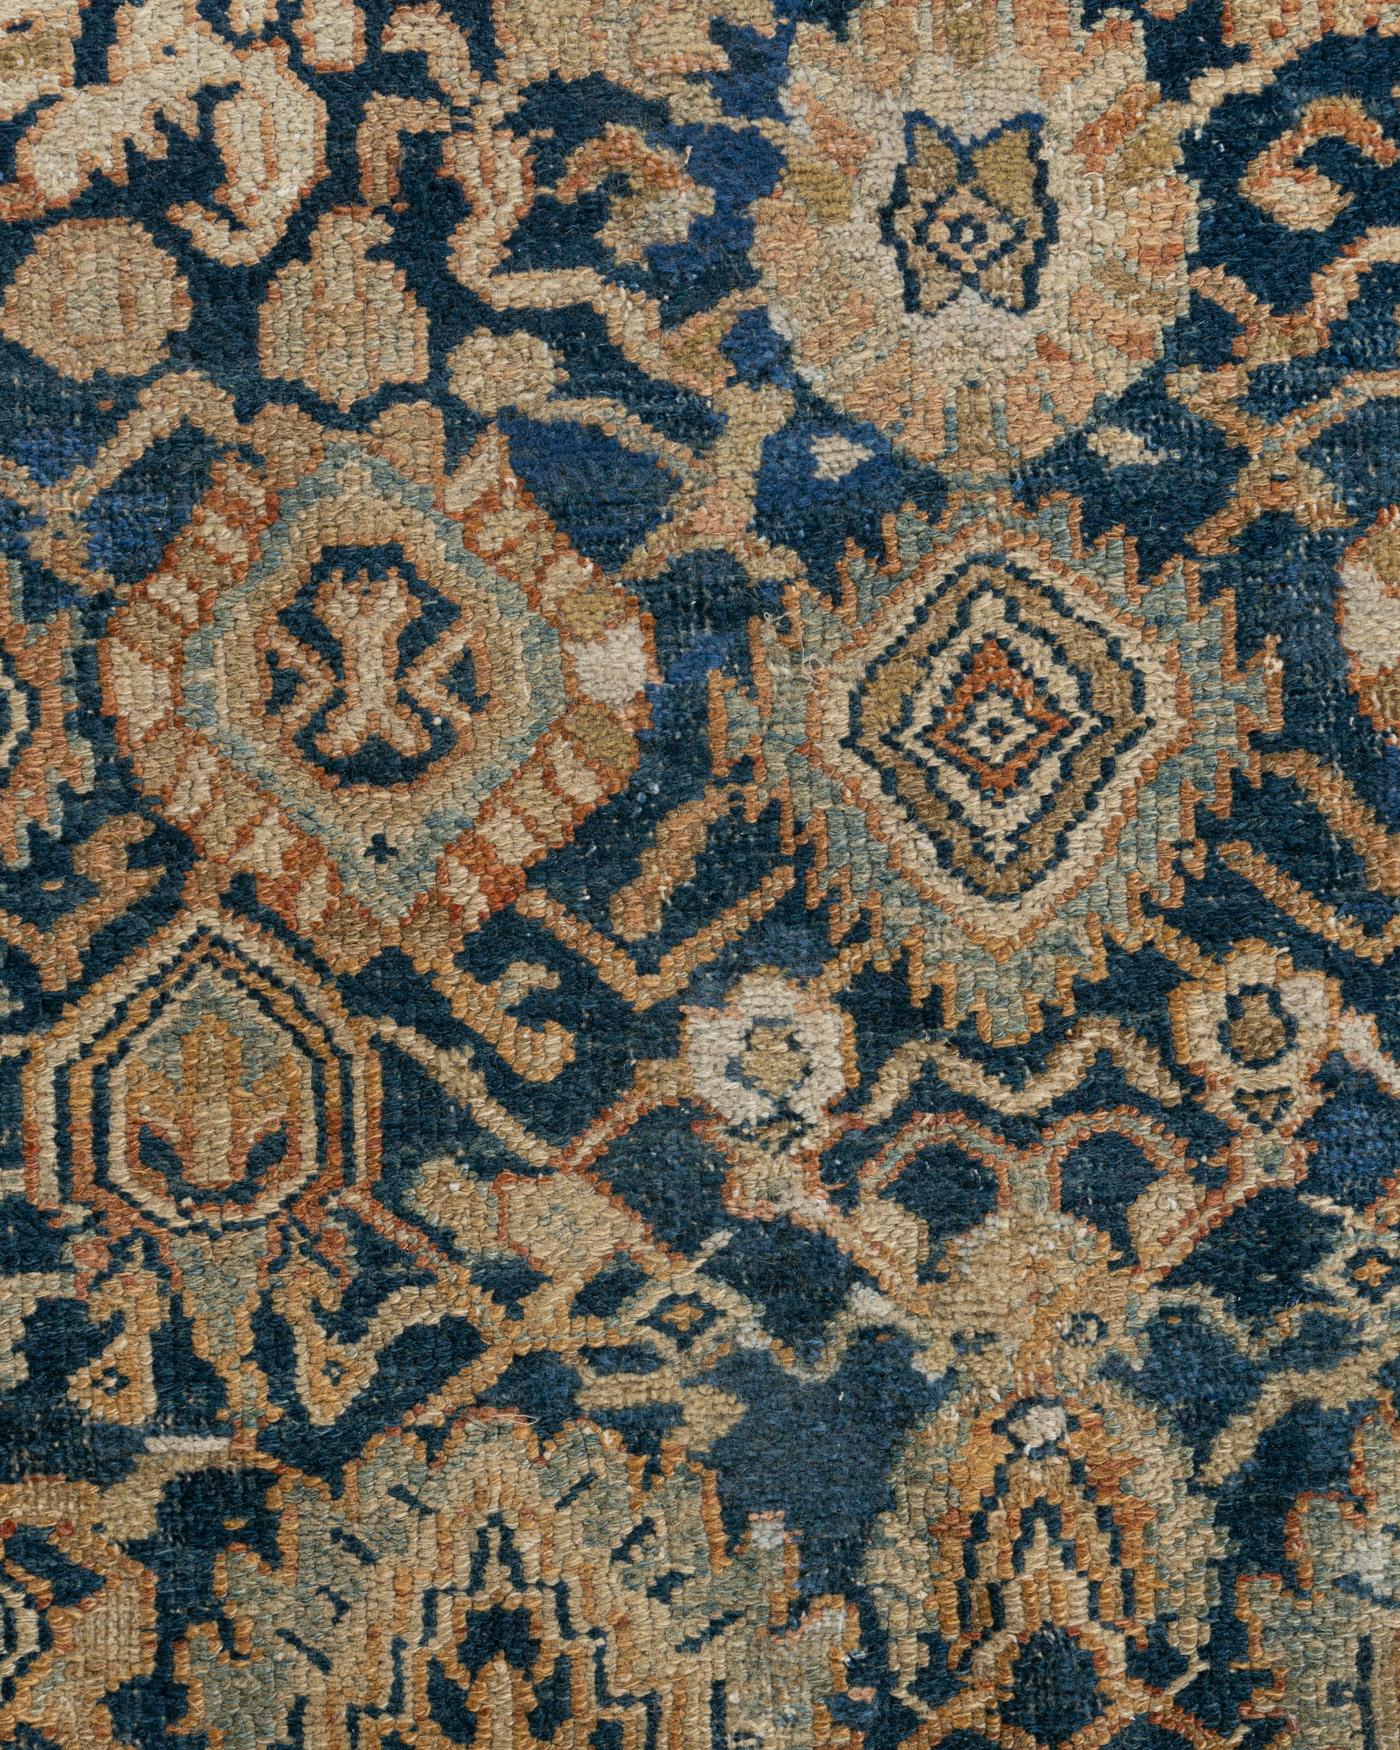 Antique Persian Malayer rug. Malayer rugs comes from west Persia near Hamadan woven in a range of medallion and all-over designs, they have a wonderful style that makes them excellent decorative pieces so suitable for today’s designs and themes.